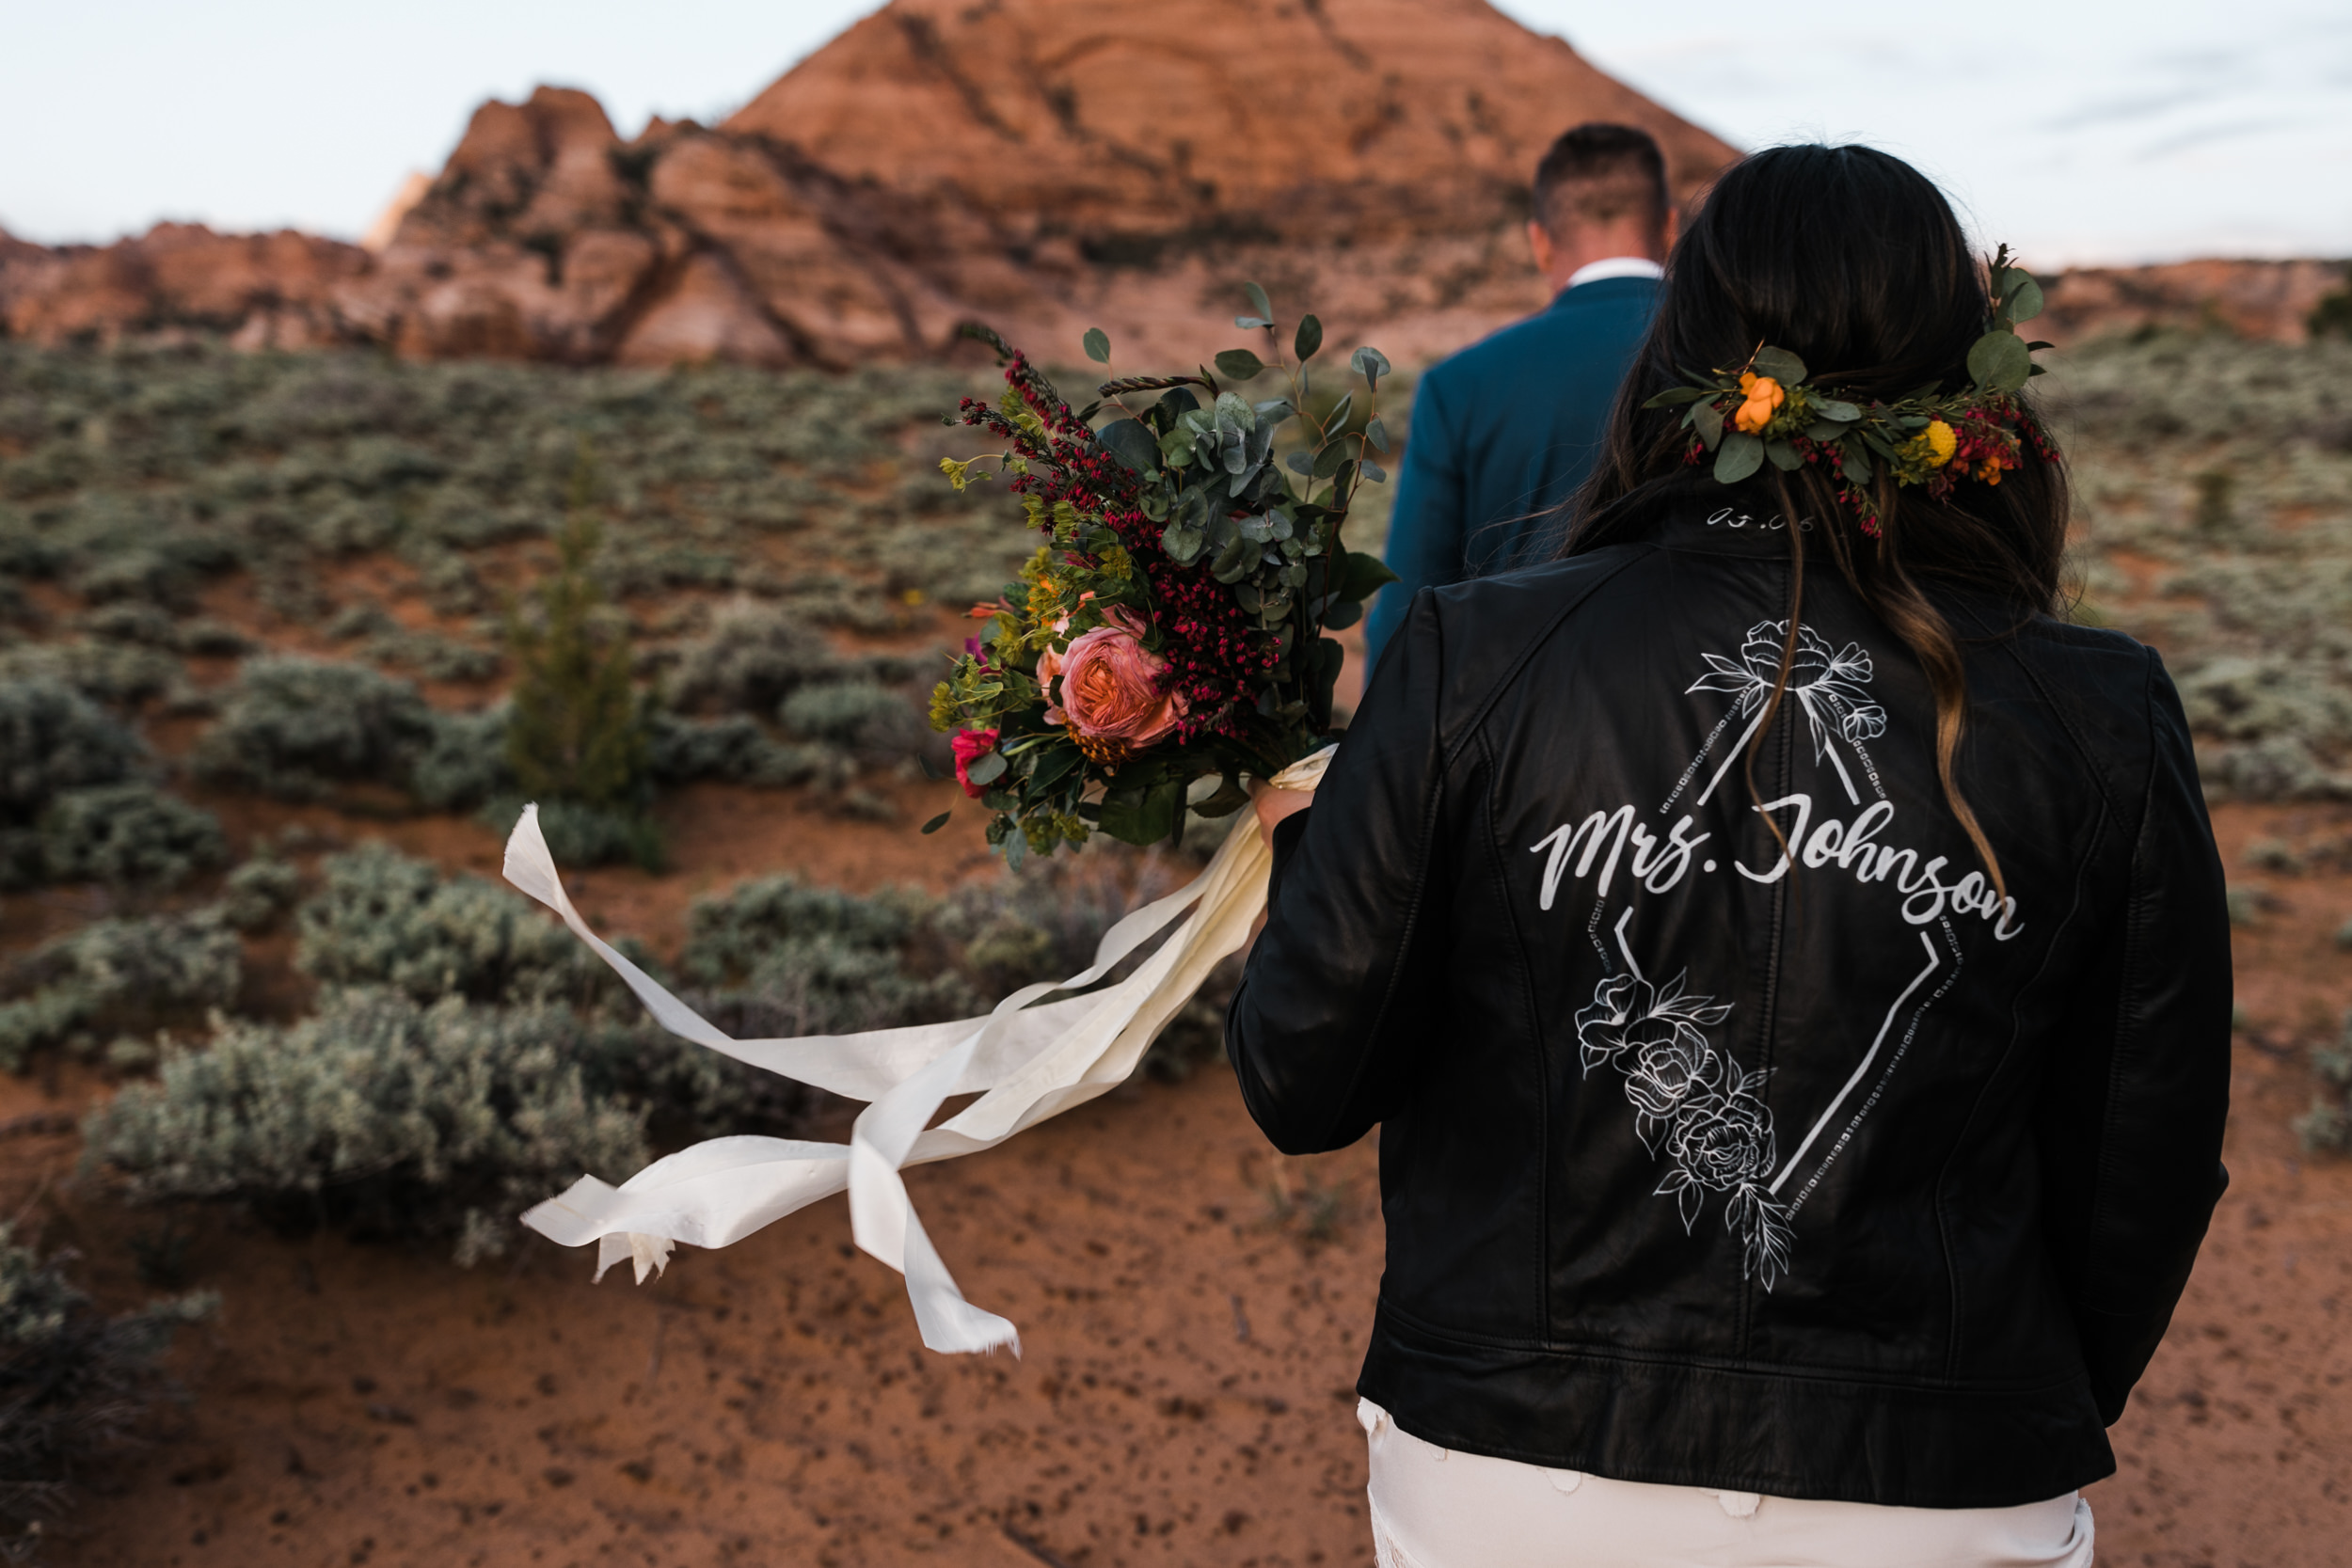 Custom leather bridal jacket | Zion National Park elopement and small wedding inspiration | The Hearnes Adventure Photography